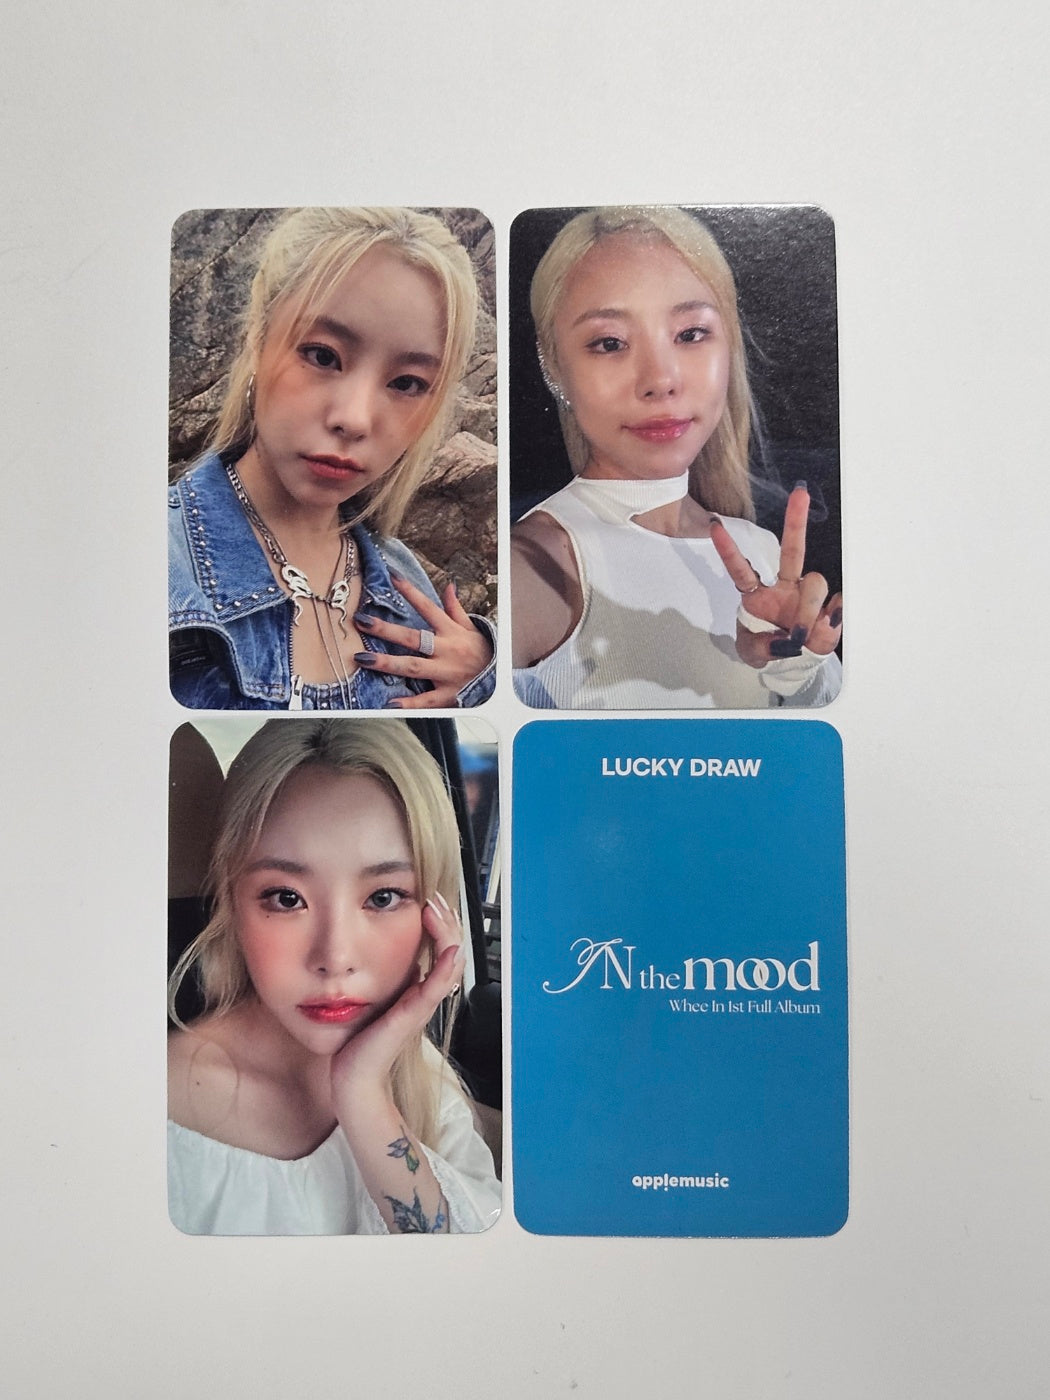 Whee In (Of Mamamoo) "IN the mood" - Apple Music Lucky Draw Event Photocard [23.10.18]